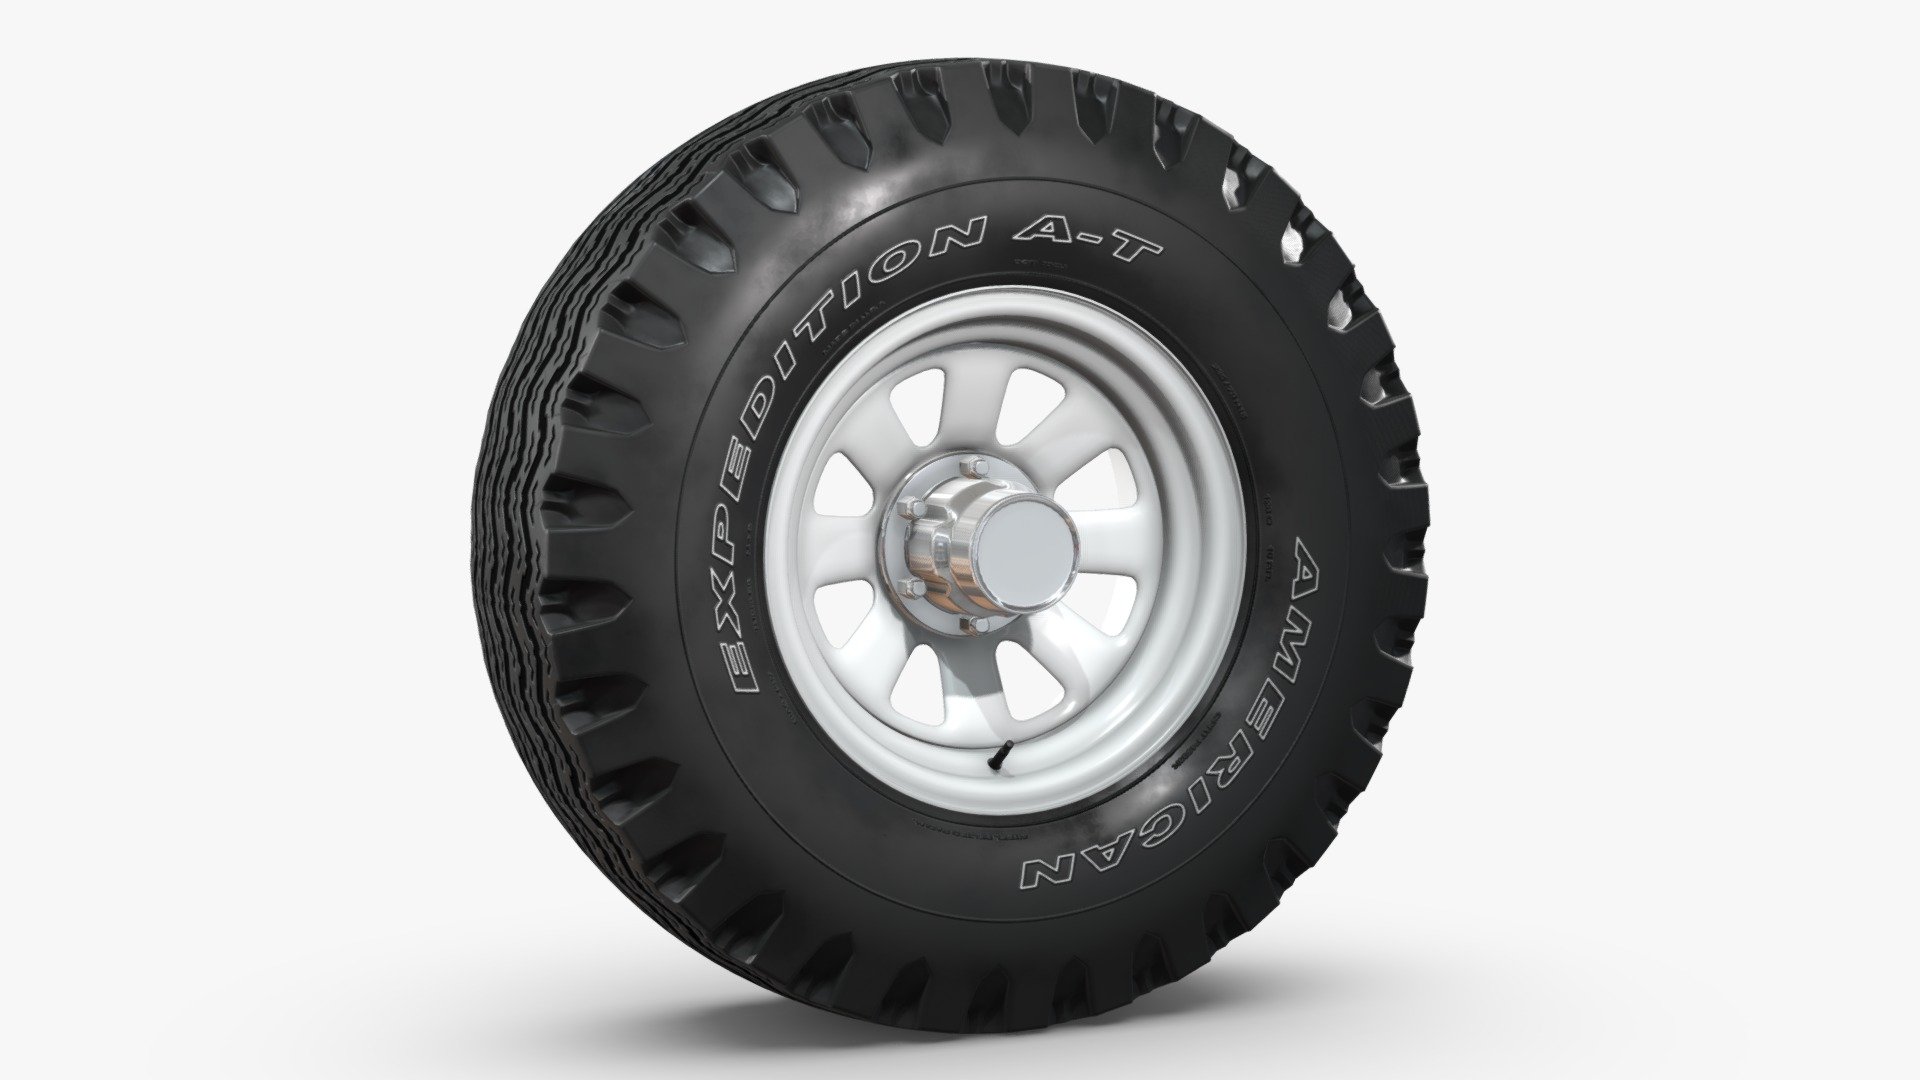 NNAVAS 3D store.

3D model of a vintage off road wheel and tire combo.

The model is fully textured and was created with 3DS Max 2016 using the open subdivision modifier which has been left in the stack. There is also a Blender version with textures.

FBX, OBJ and 3DS files have been included in separated HI and LO subdivision versions.

Renderer: V Ray and Cycles.

All materials and textures are included and mapped in all files might have to be adjusted depending on the software you are using. 

JPG textures have 2048 x 2048 resolution 3d model